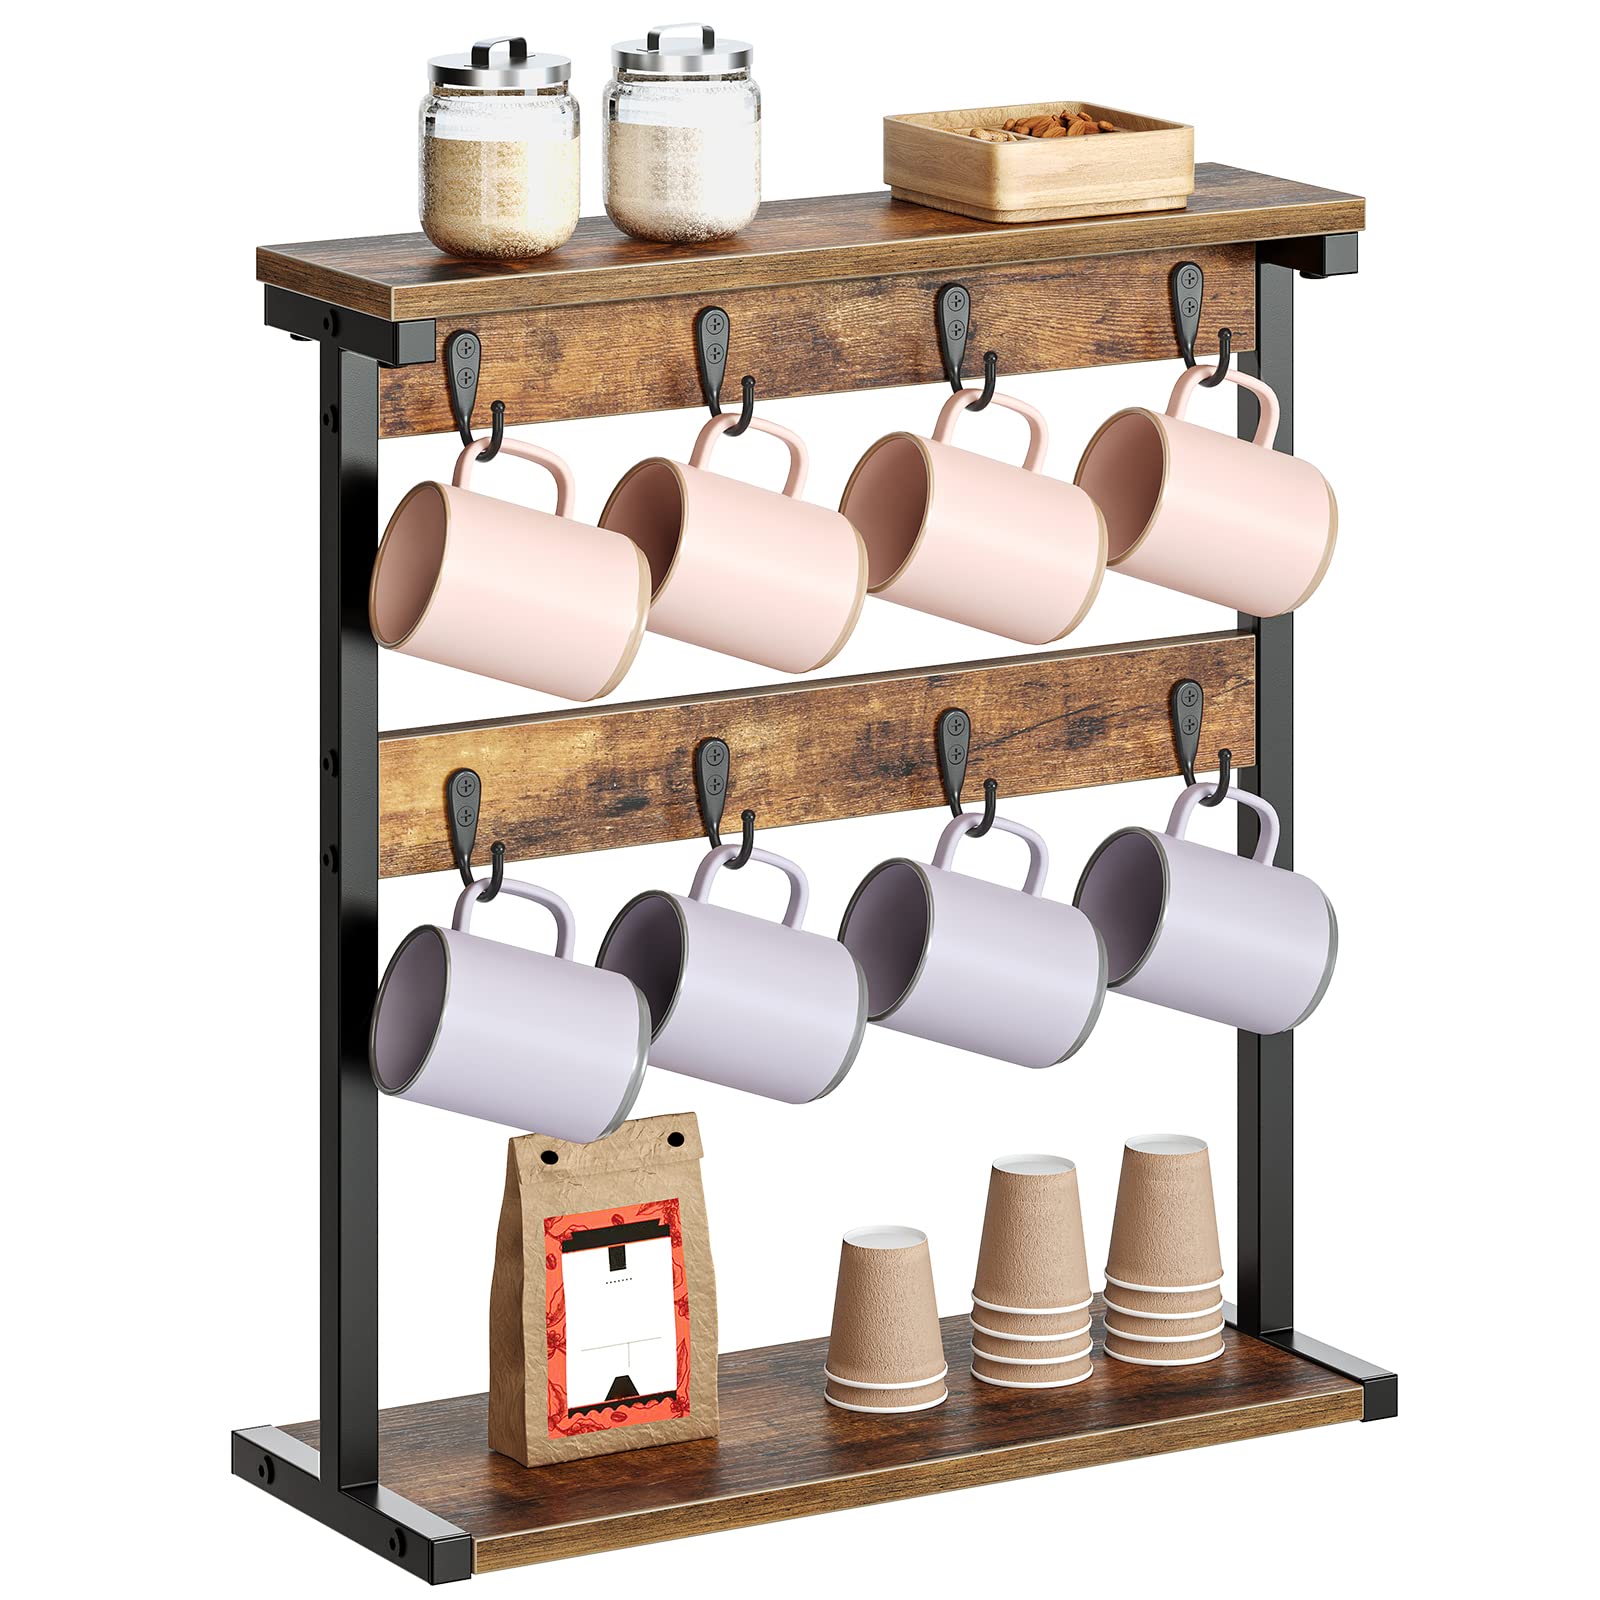 YATINEY Coffee Mug Holder for Counter, 2 Tier Mug Tree Rack, with 8 Hook and 2 Open Shelves, Vintage Mug Holder Stand for Home Kitchen, Rustic Brown MH43BR